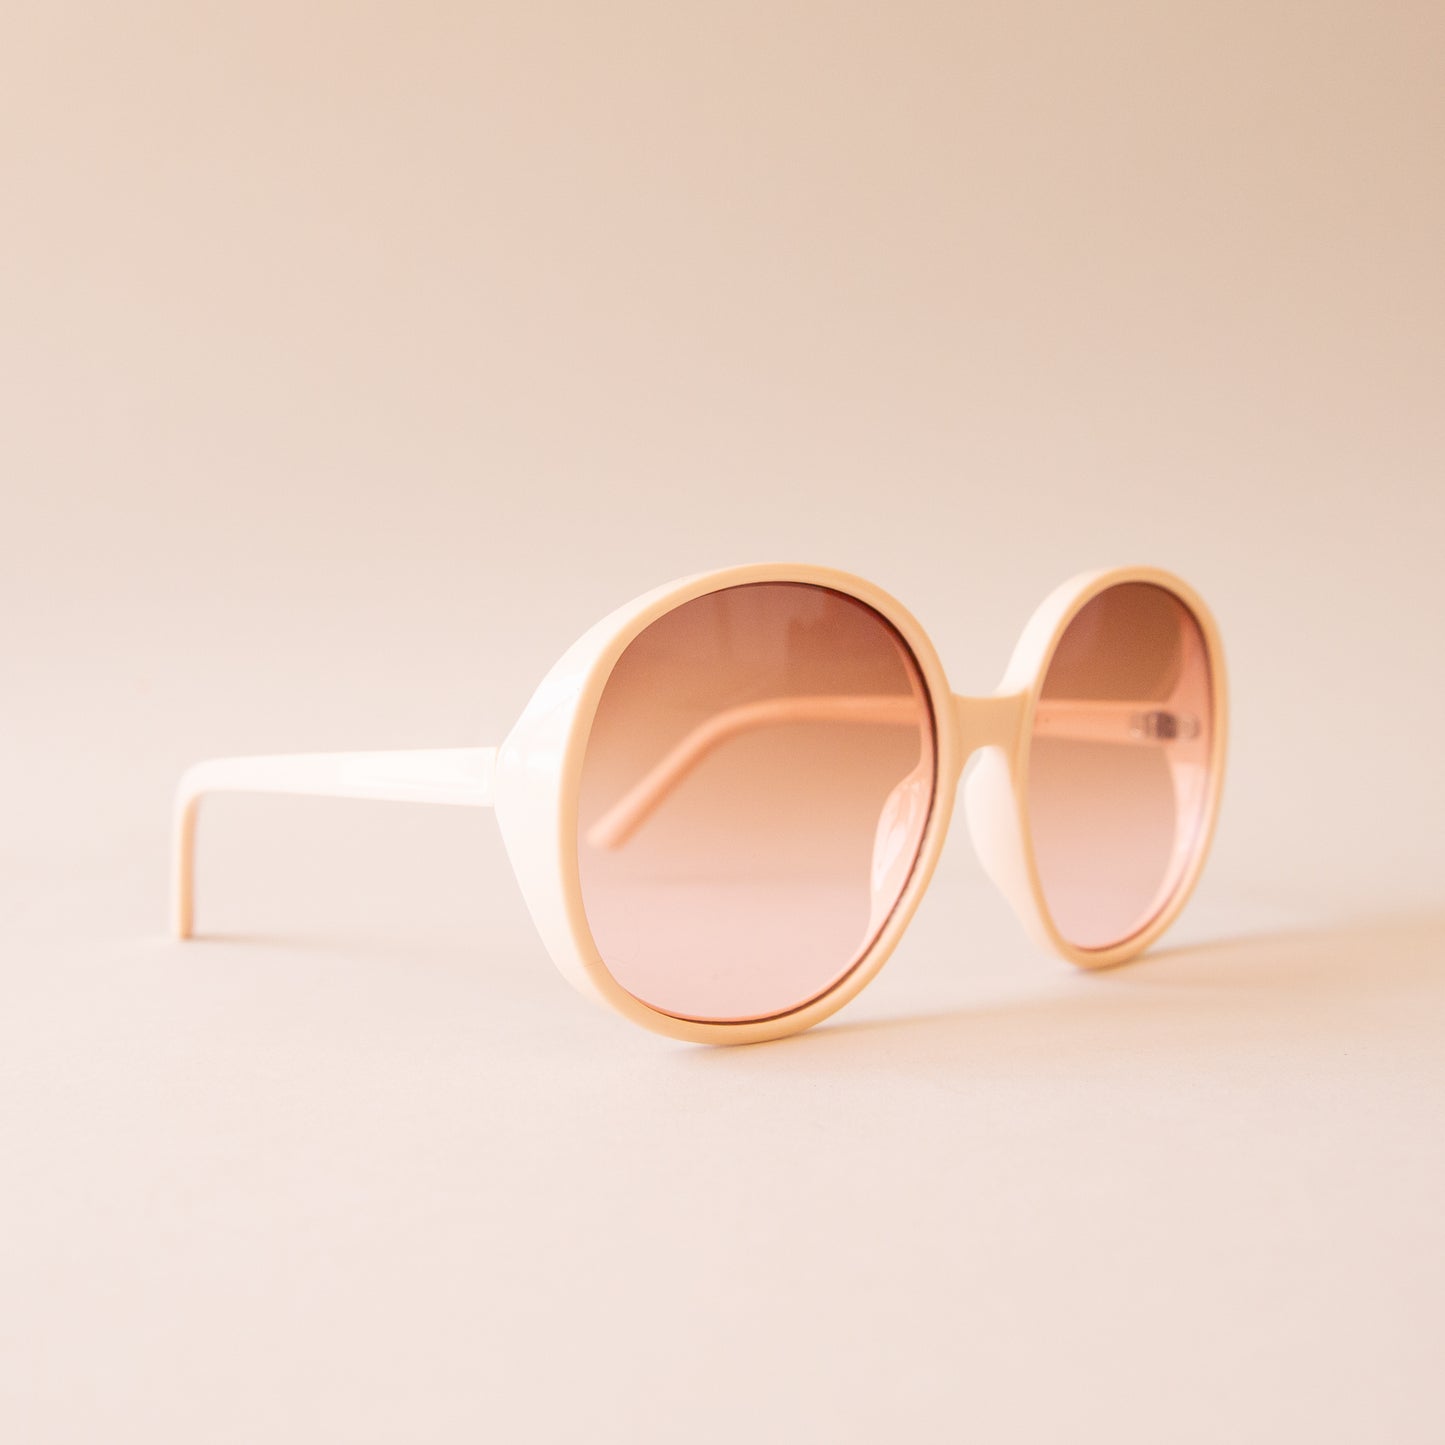 A creamy white pair of round oversized sunglasses with a light brown / pink lens.